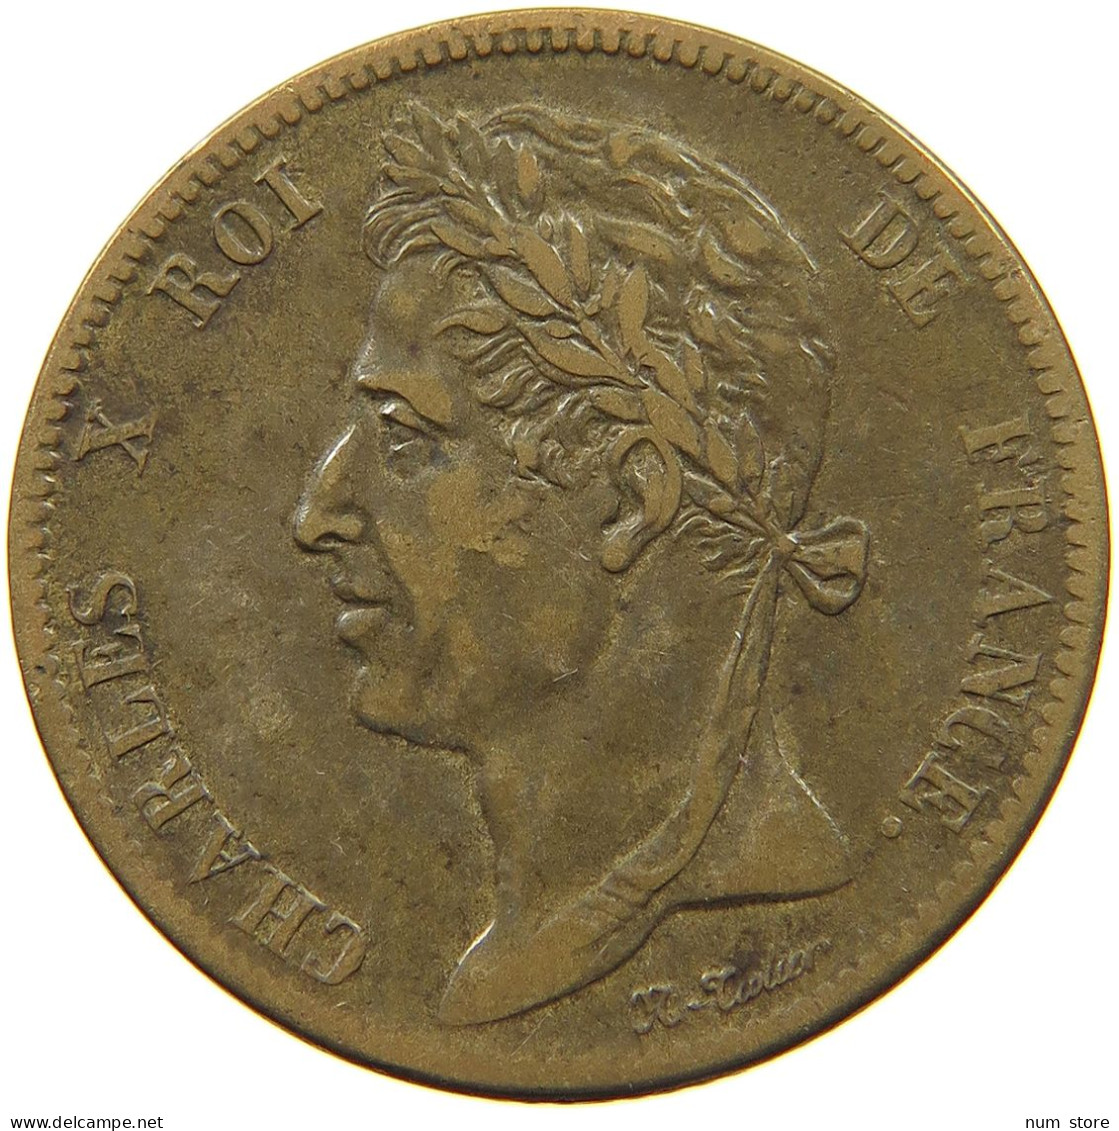 FRANCE COLONIES 5 CENTIMES 1825 A Charles X. (1824-1830) #t112 0123 - French Colonies (1817-1844)